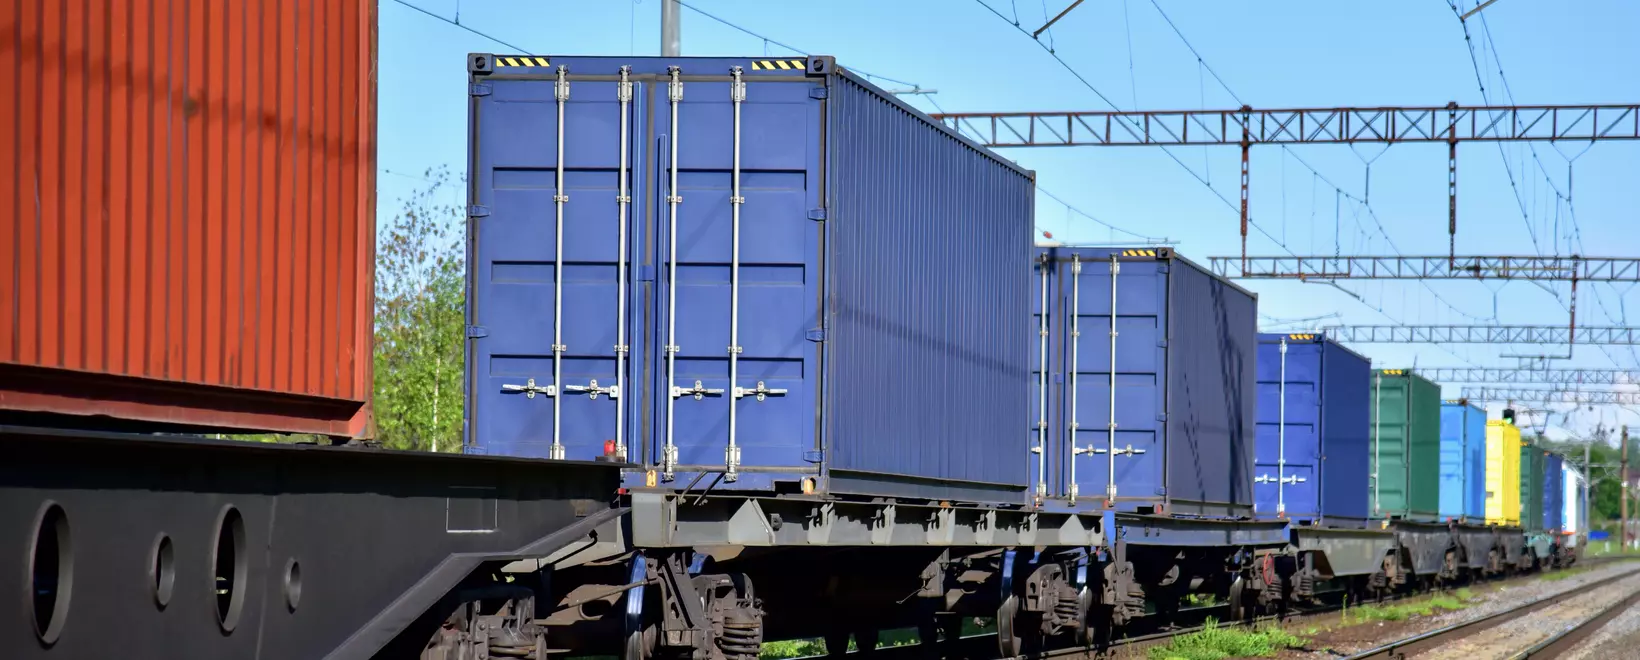 Containers transported on railways which will then be transported by road